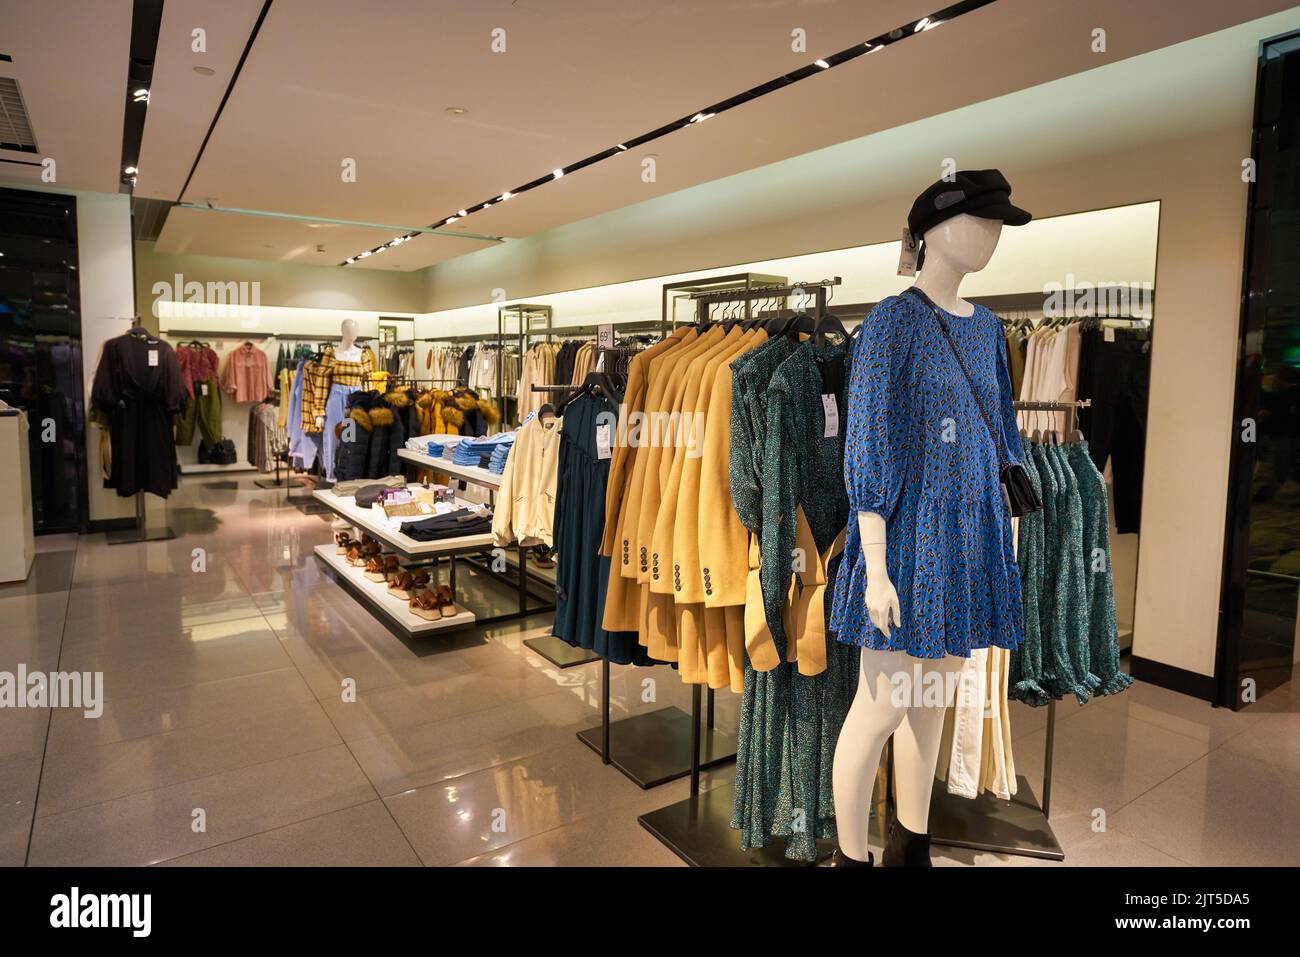 SINGAPORE - CIRCA JANUARY, 2020: clothes on display at Zara store in ...